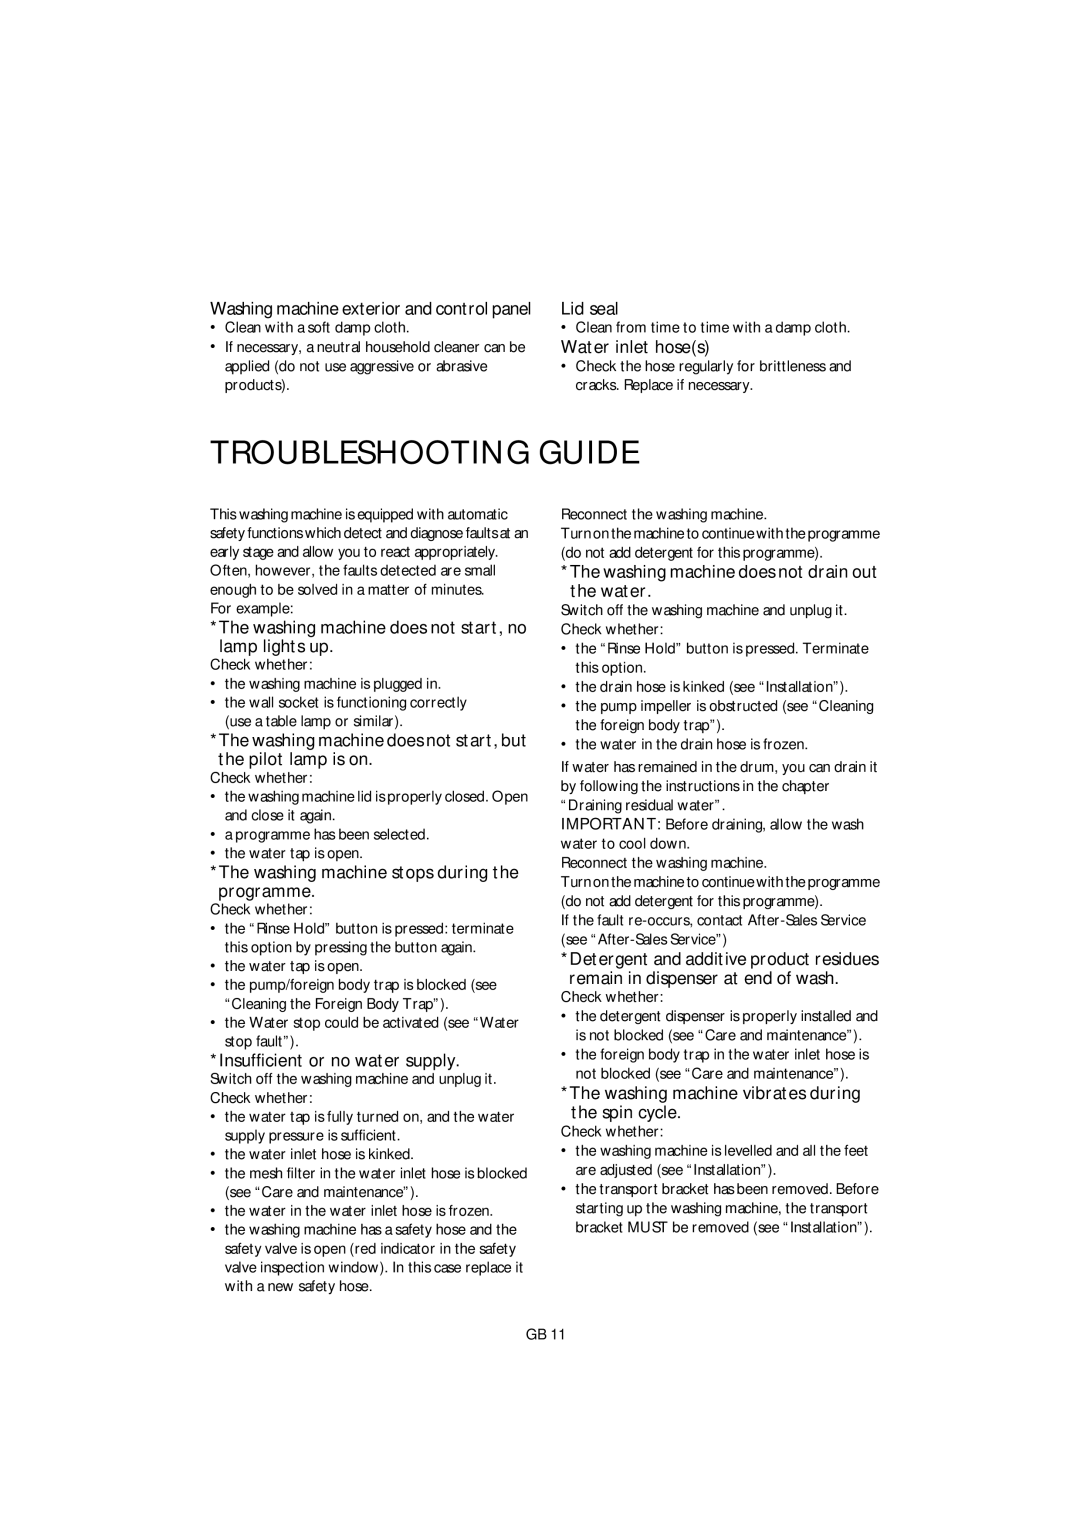 Smeg GB ST L80 manual Troubleshooting Guide, Water inlet hoses, The washing machine does not start, no lamp lights up 